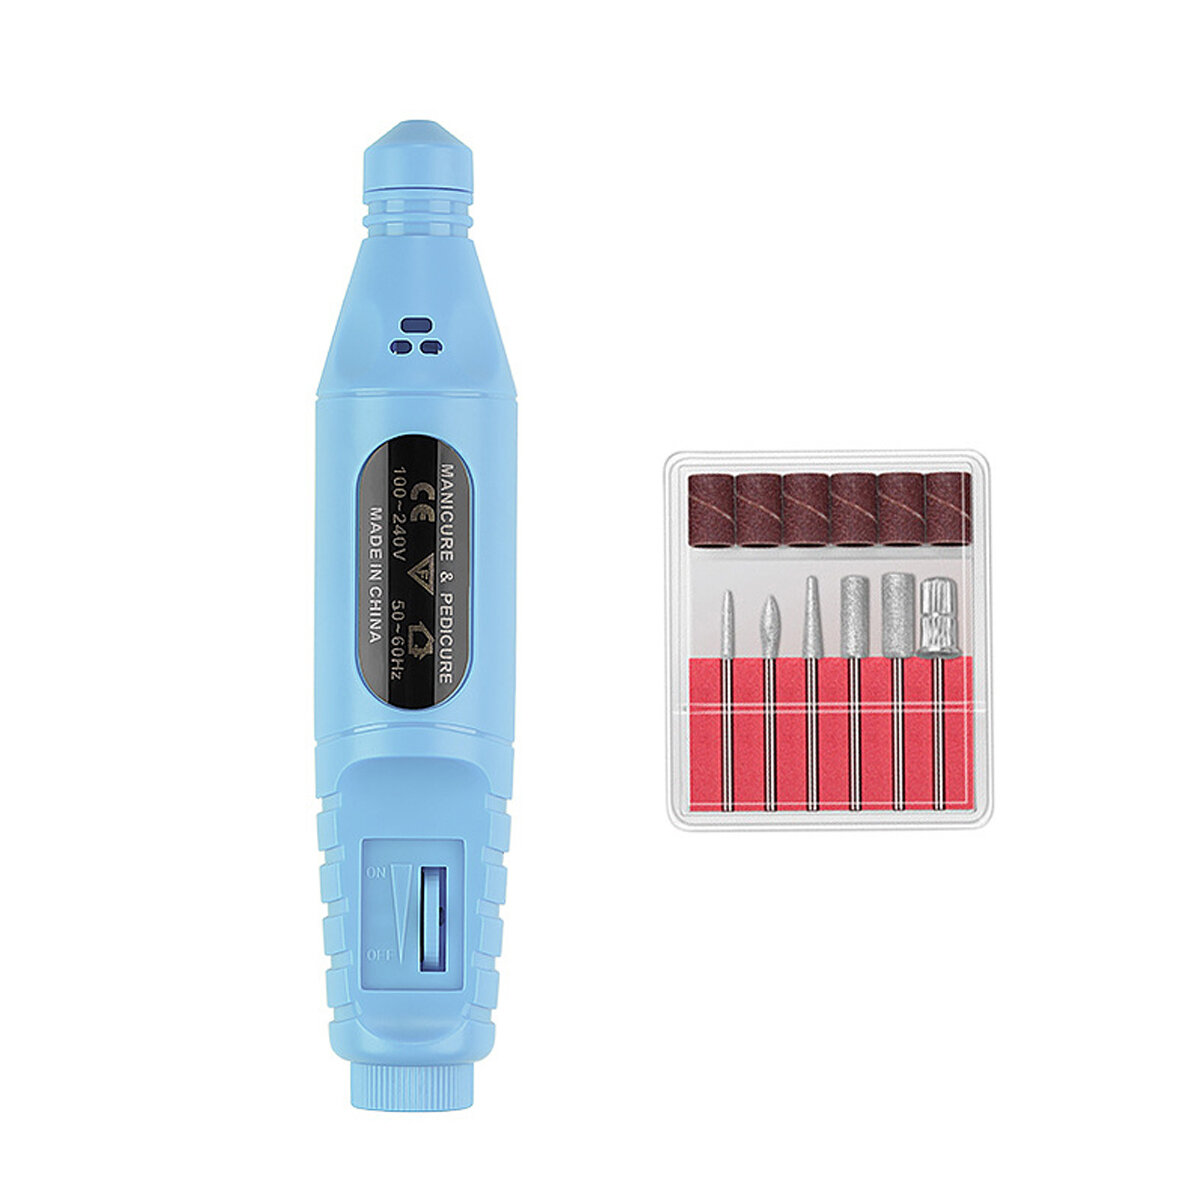 3000-20000 Adjustable Speed Pedicure Manicure Nail Polisher Drill Electric Nail Drill Machine...